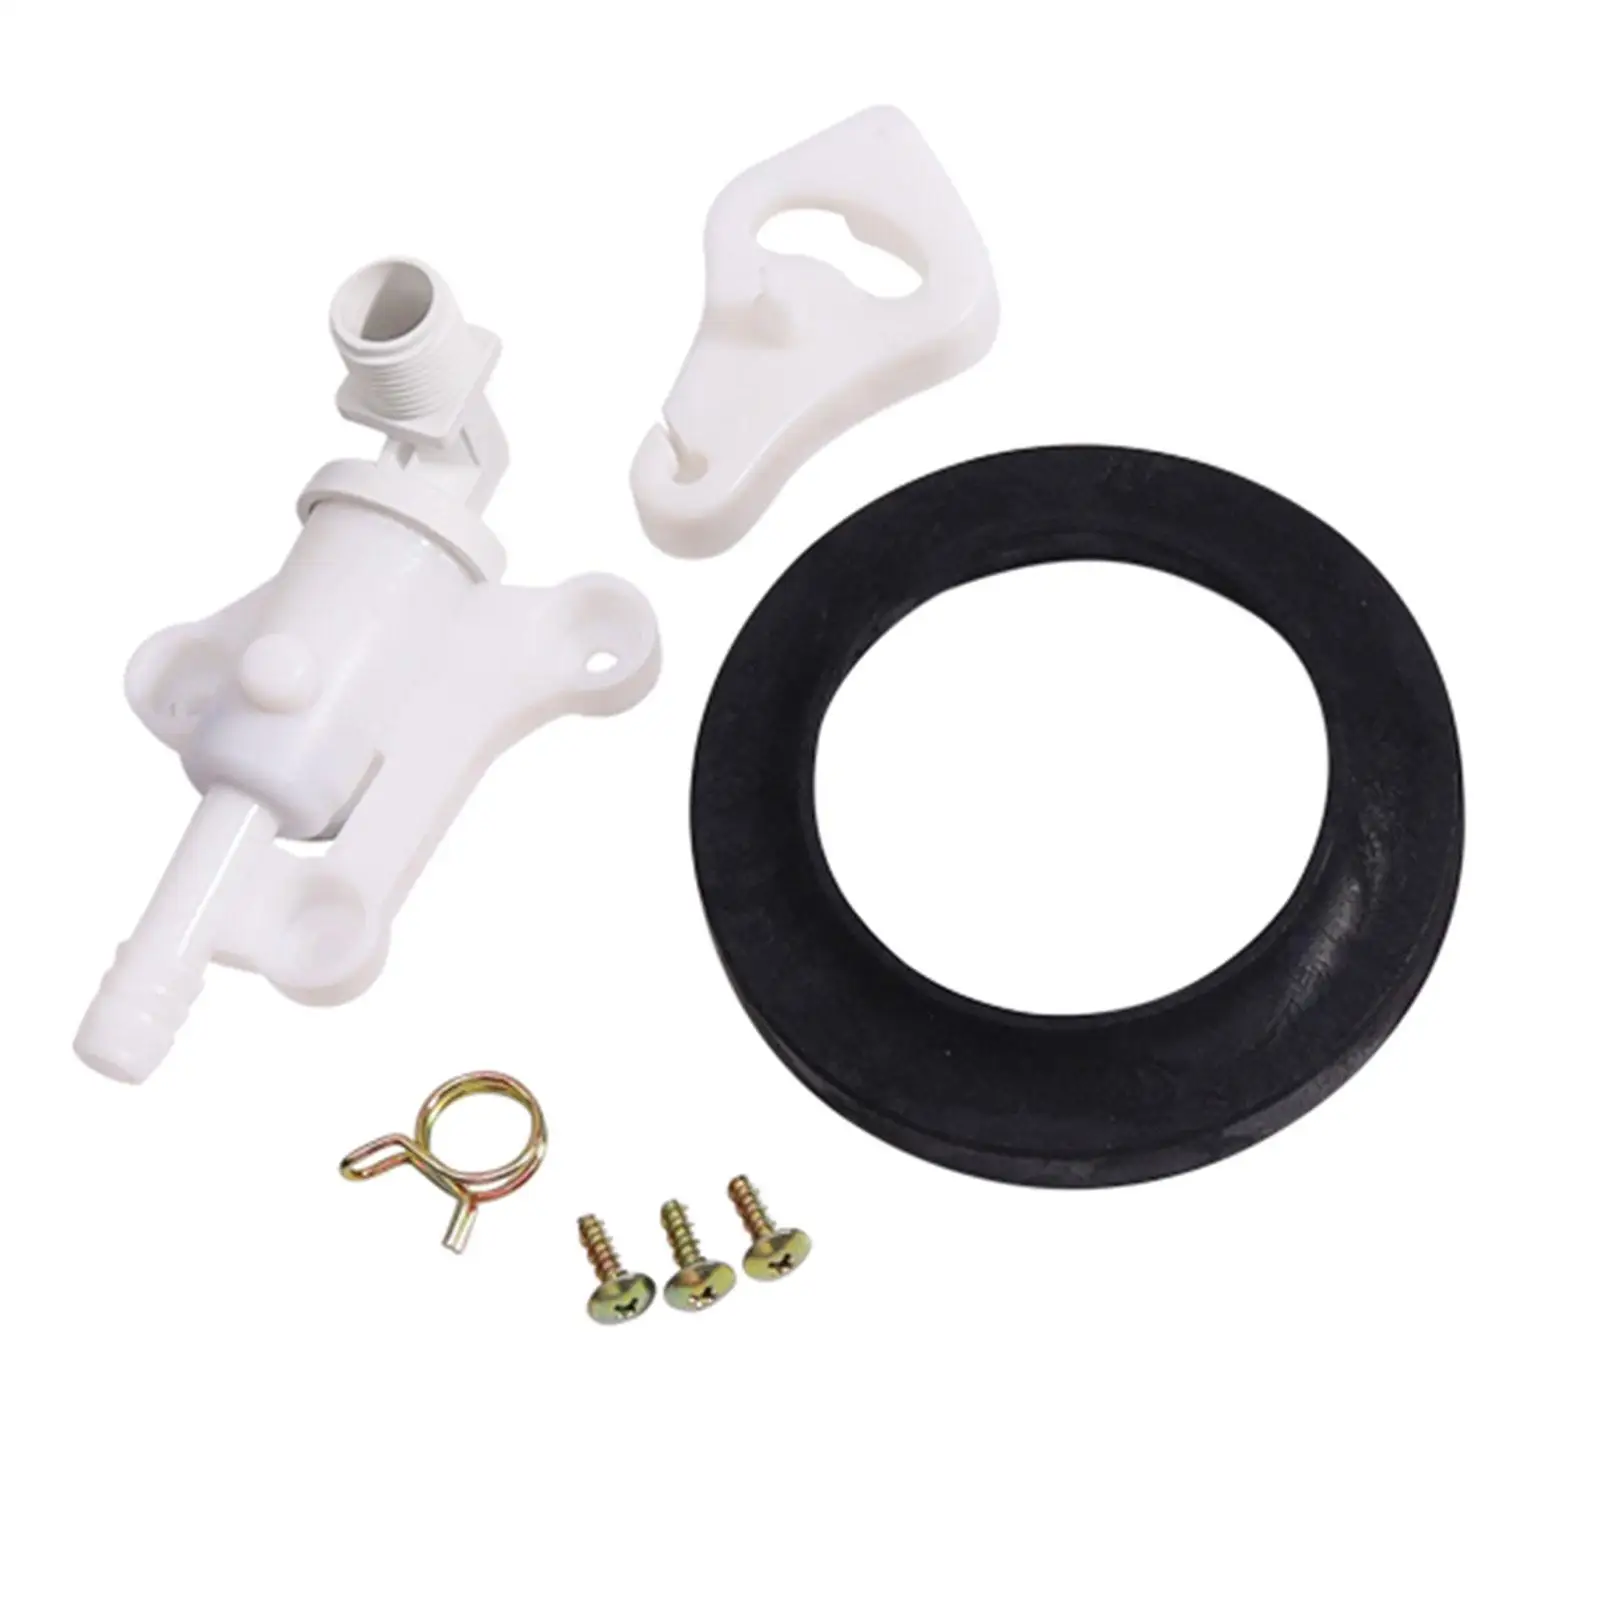 34100 RV Water Valve for Style Lite Toilets Accessory Replace for Practical